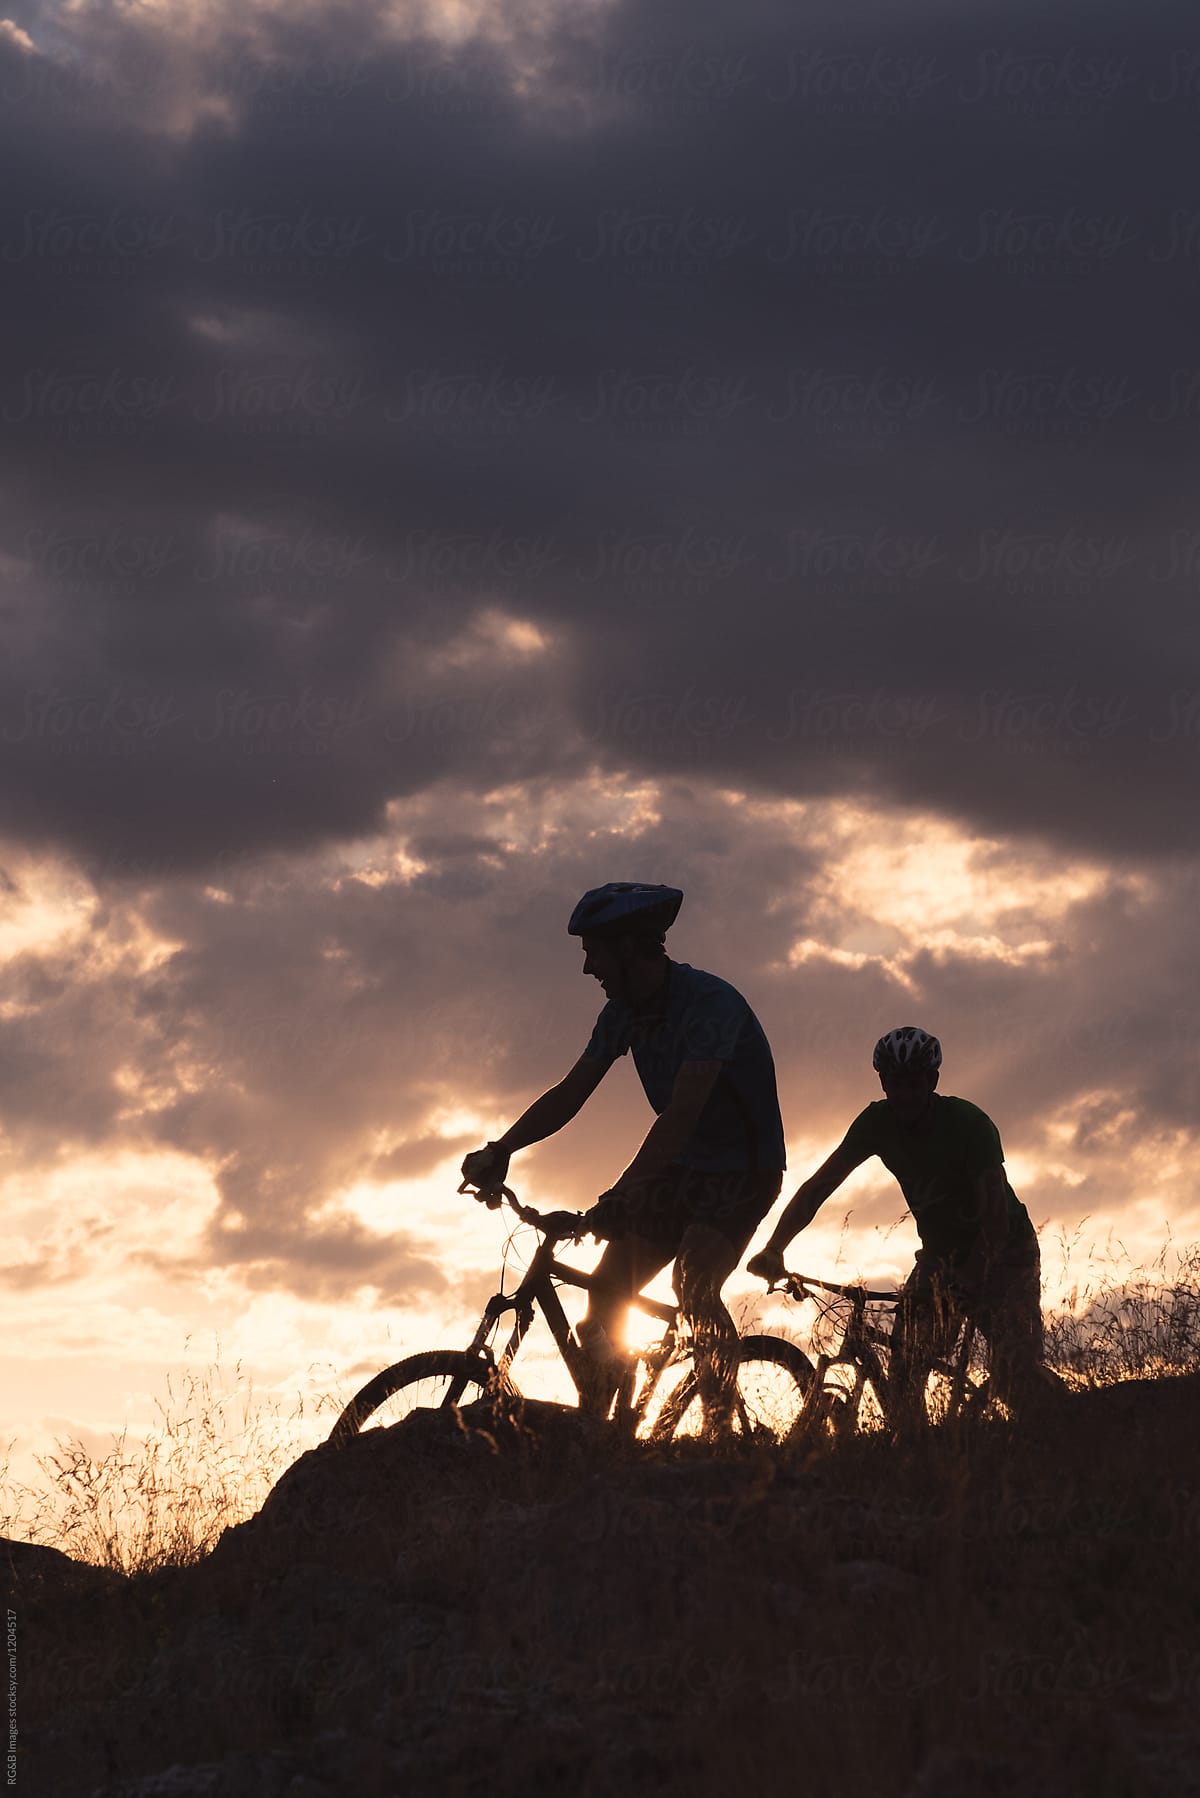 Sportsmen silhouettes riding mountain bikes with sunset sky in backround